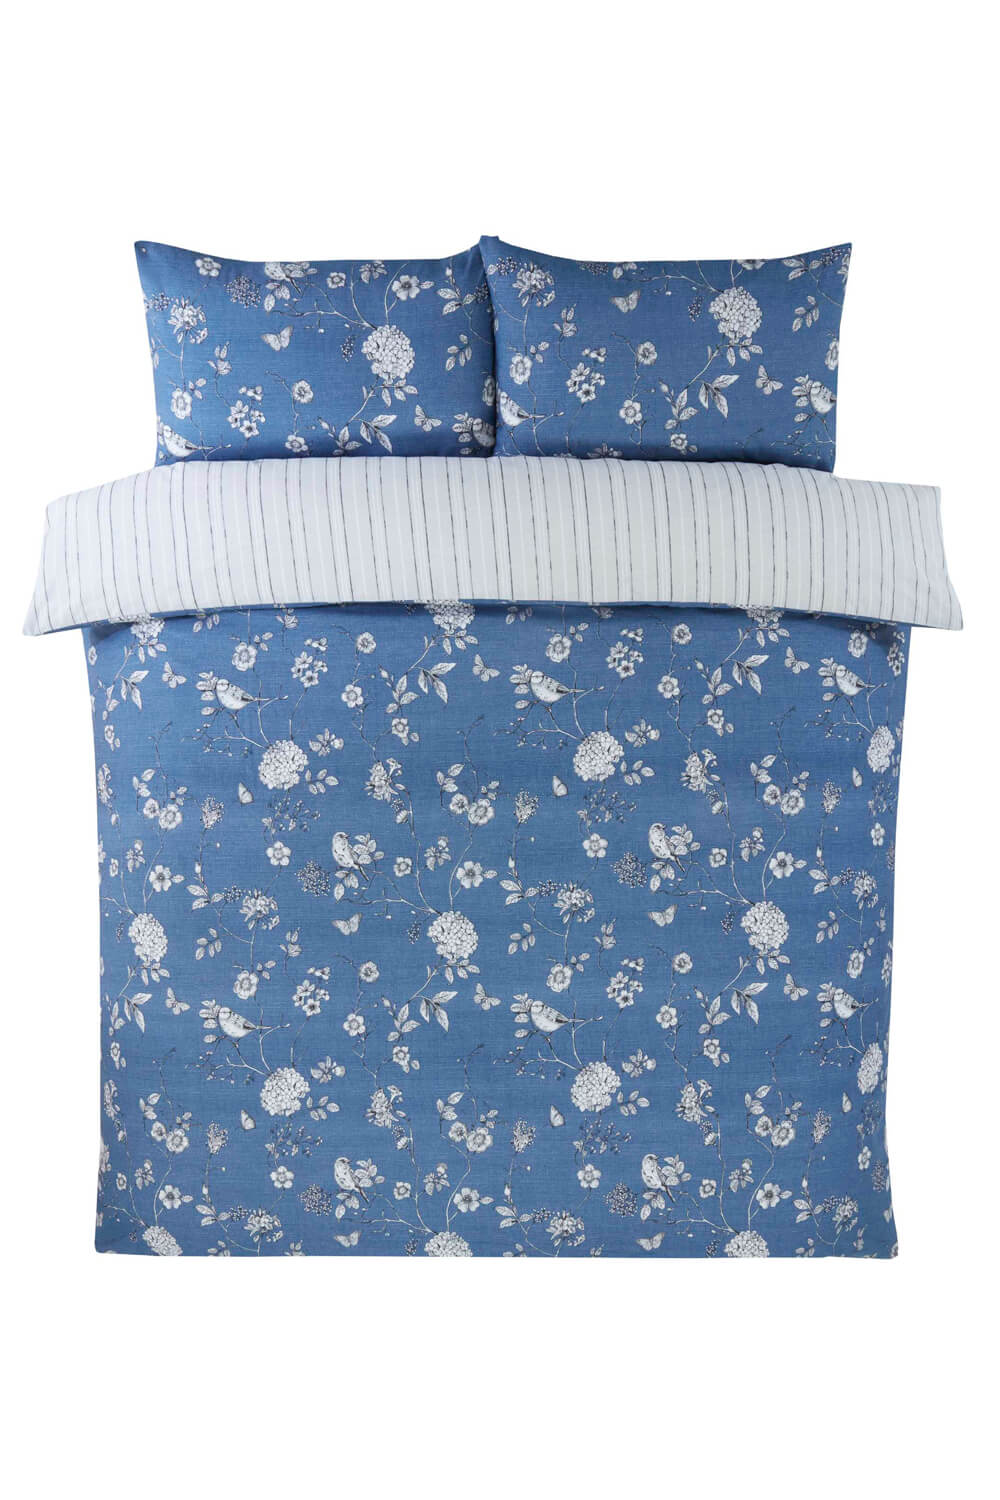 Blue King Size Country Toile Floral Duvet Set, Image 3 of 3